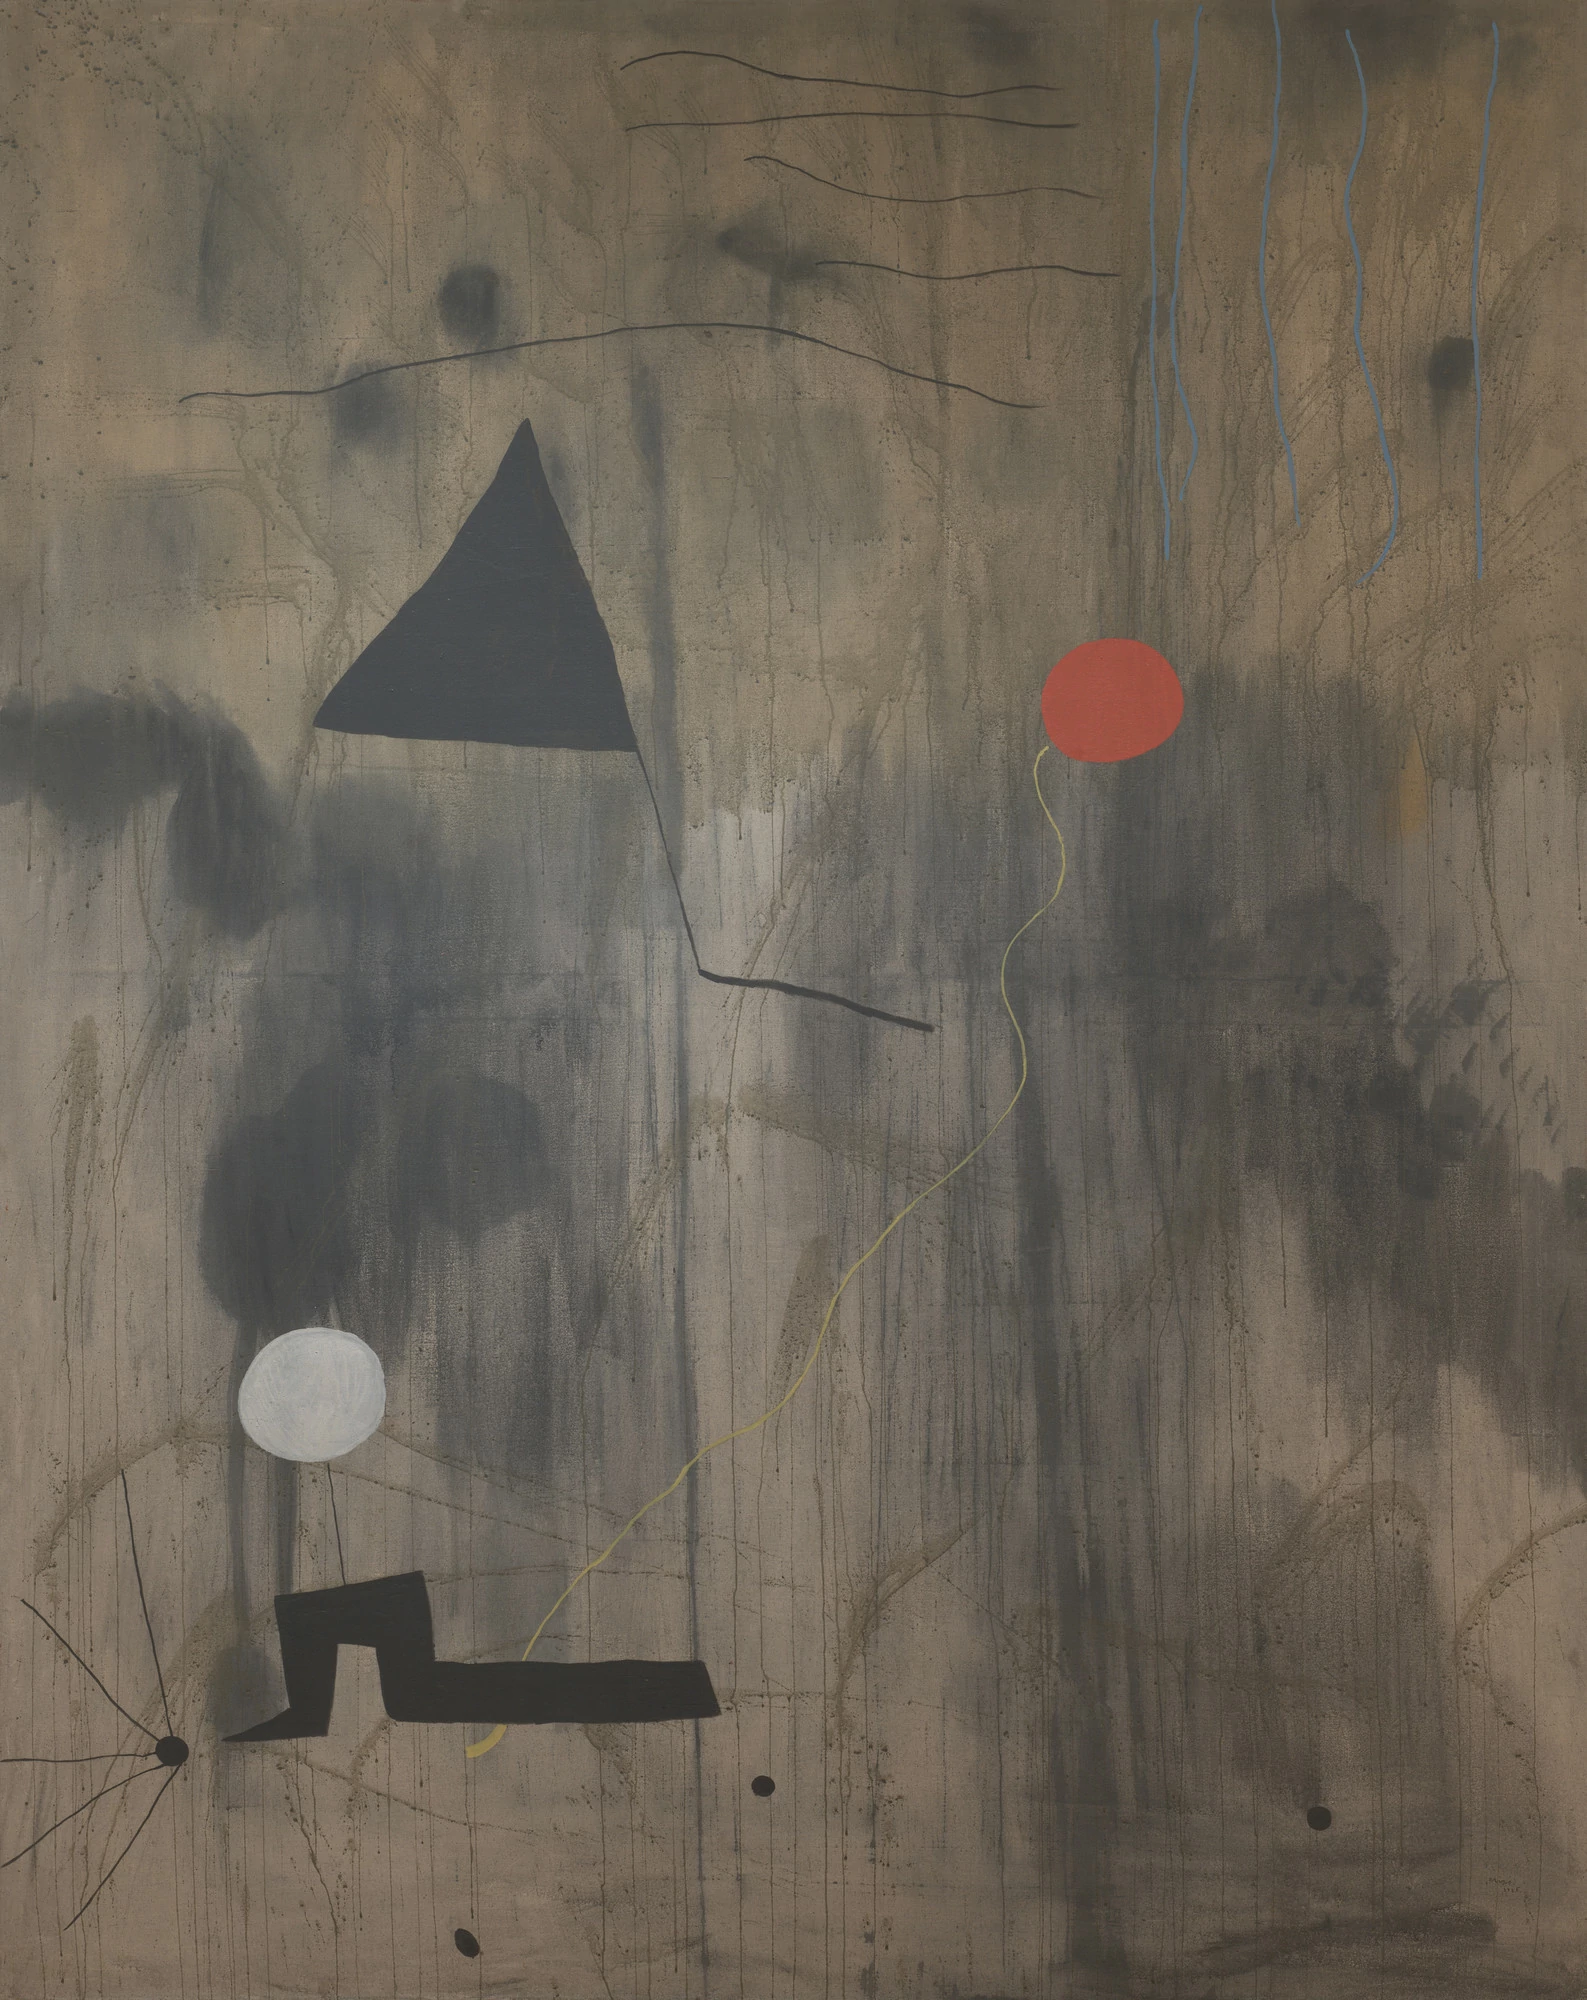 The Birth of the World, Joan Miró